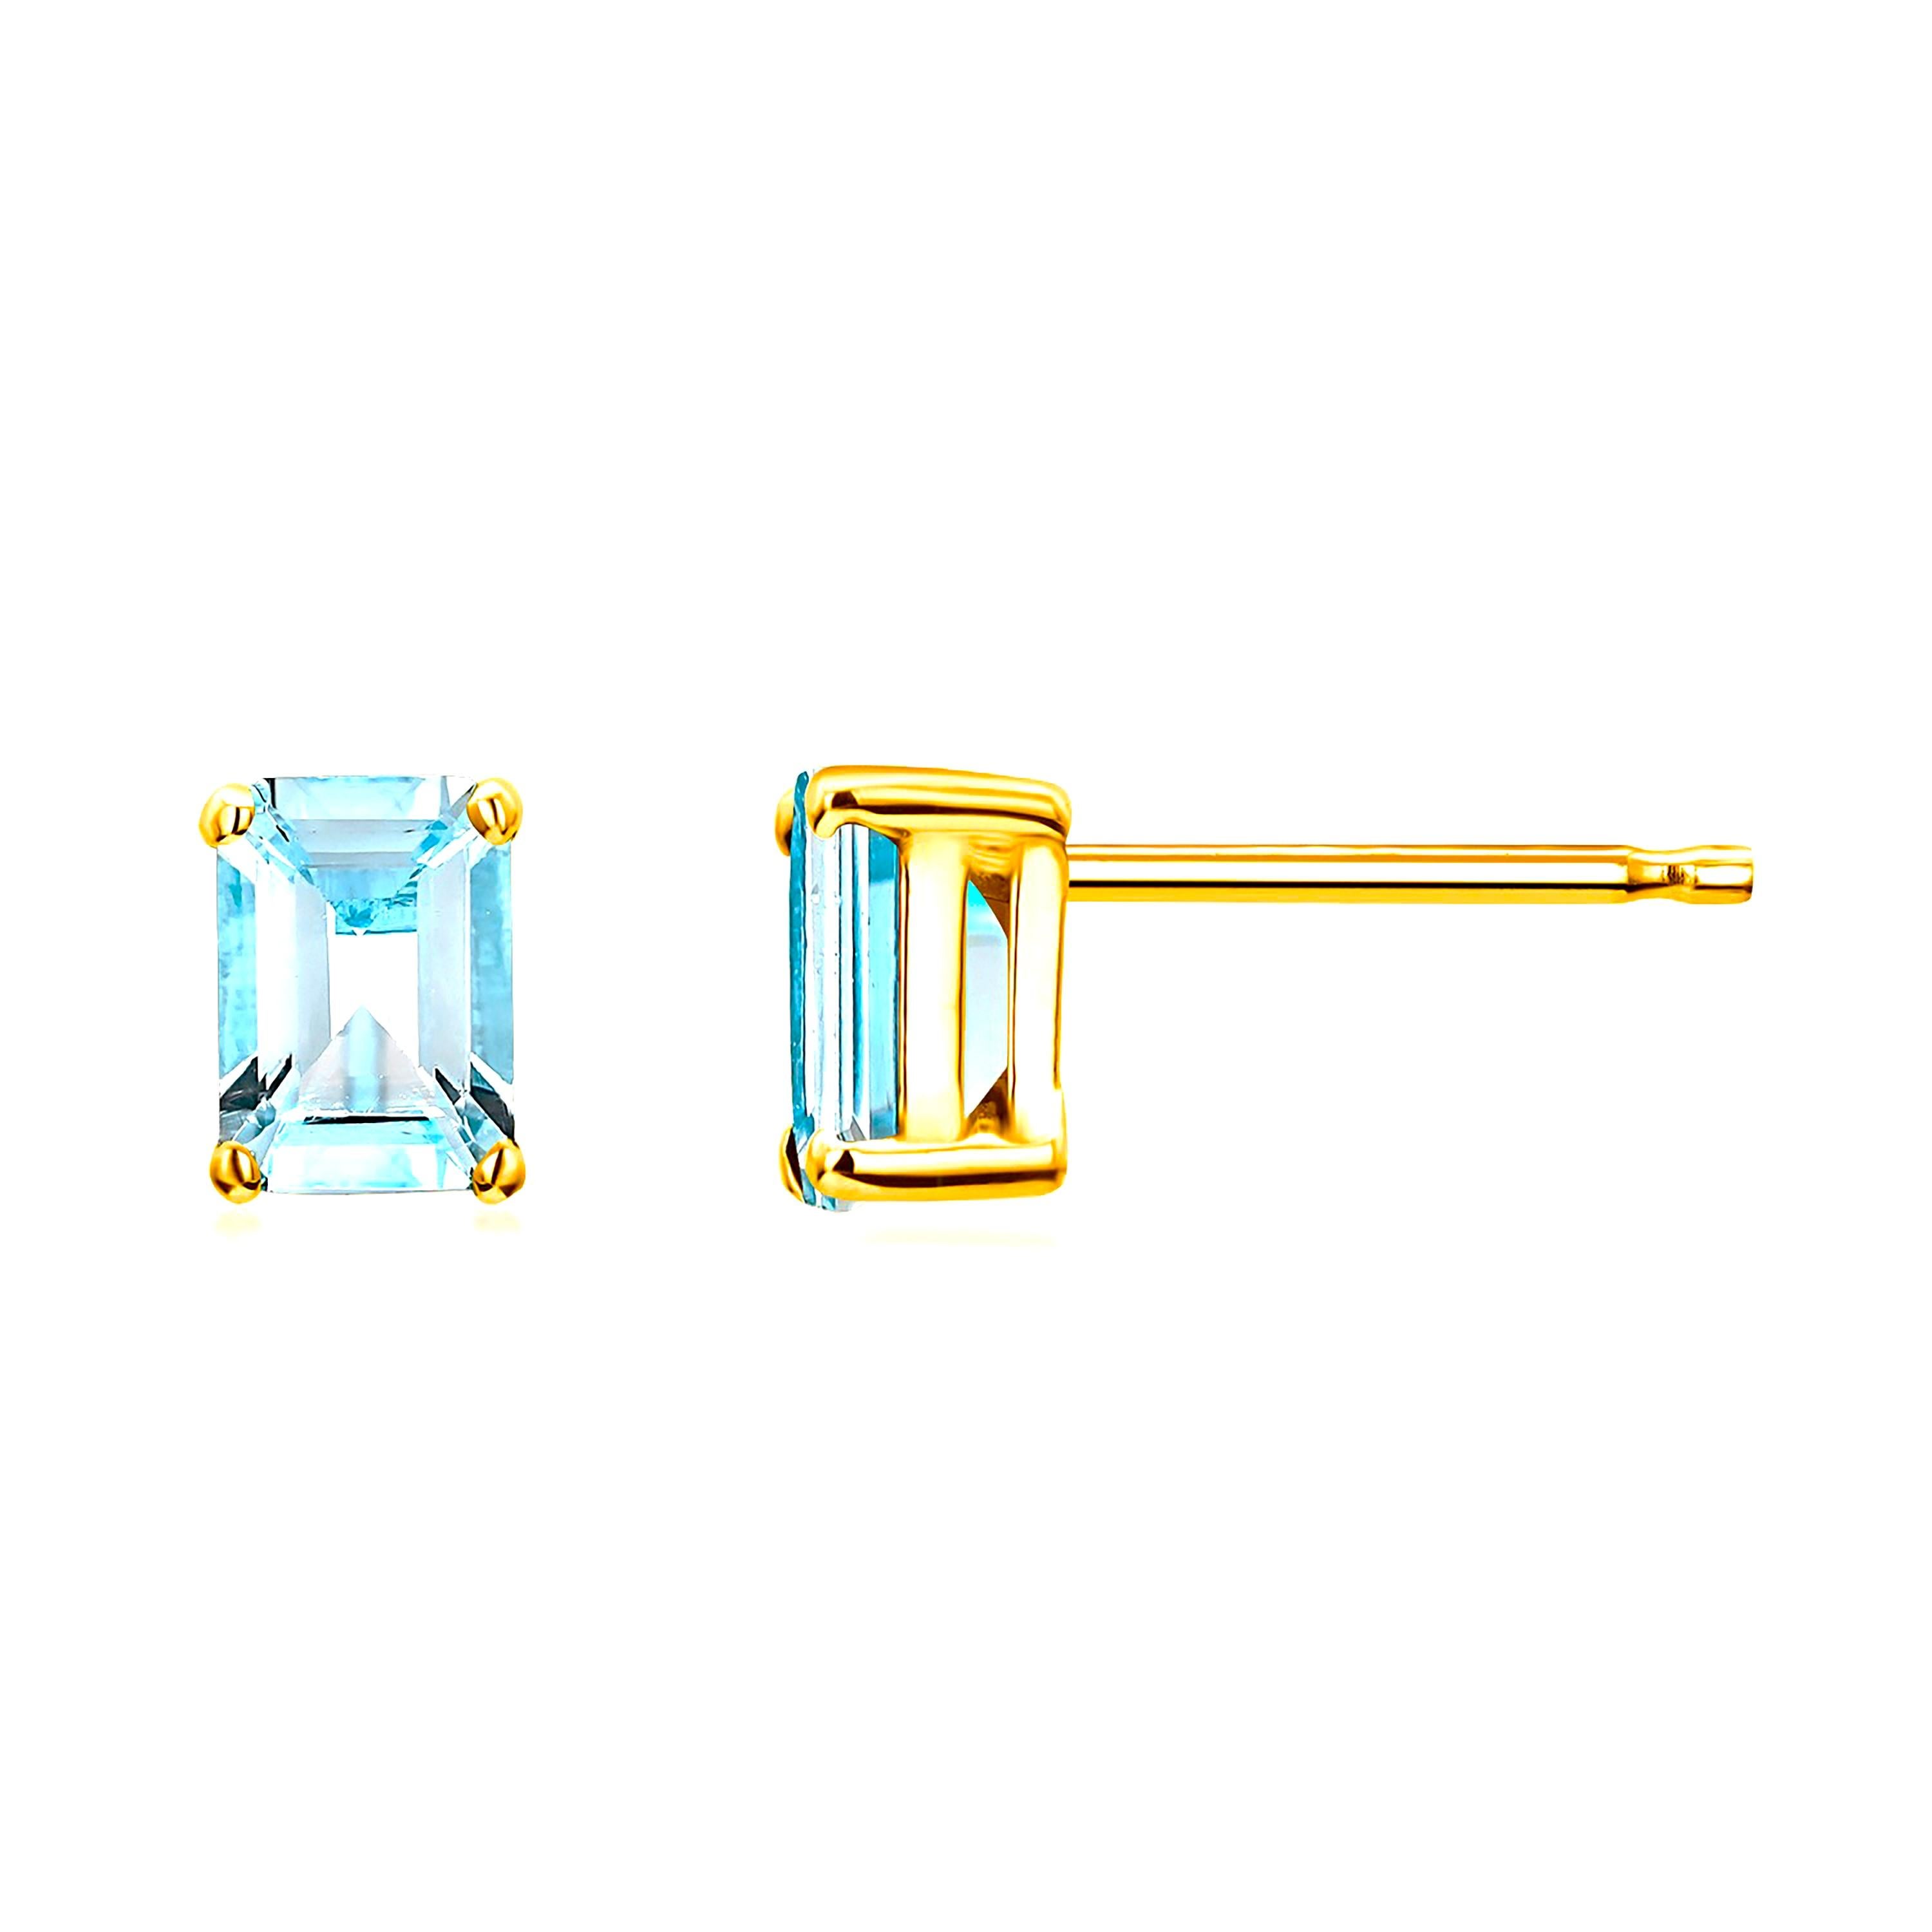 Contemporary Emerald Shaped Aquamarine Set in Yellow Gold Stud Earrings Weighing 1.60 Carats